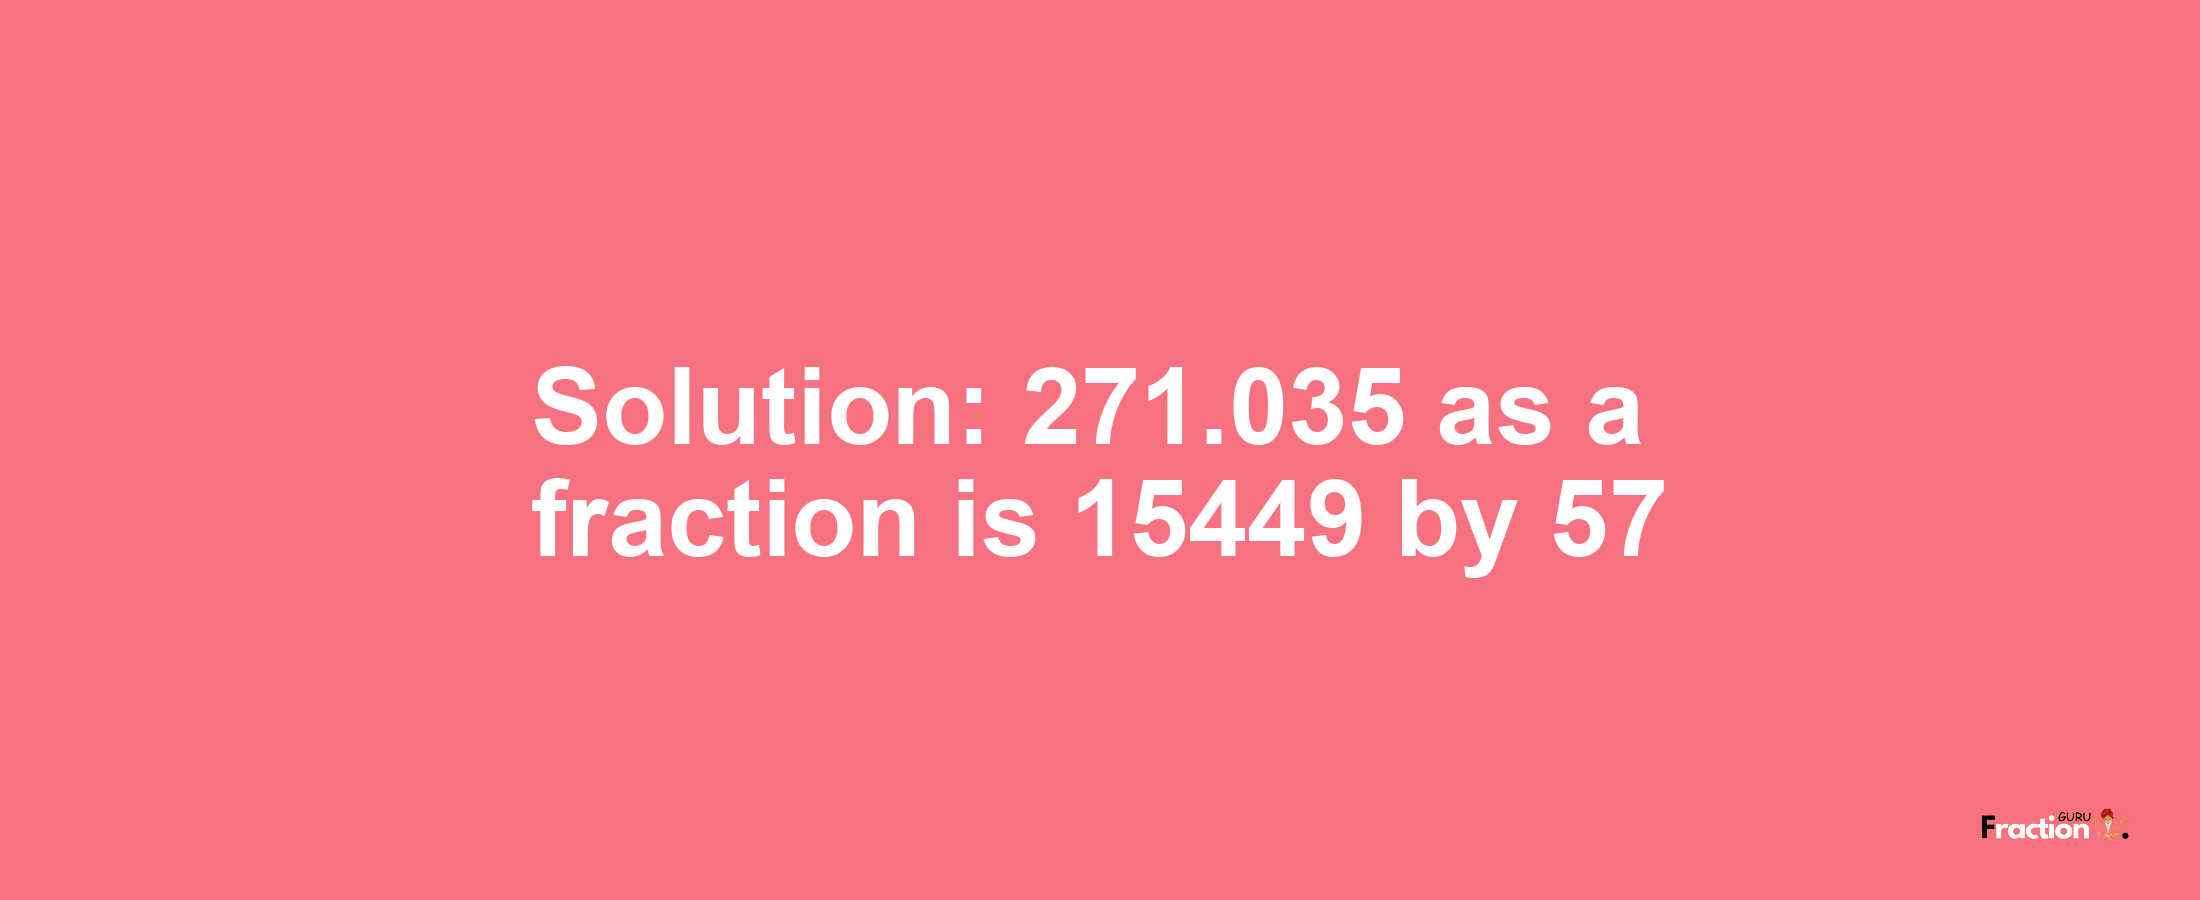 Solution:271.035 as a fraction is 15449/57